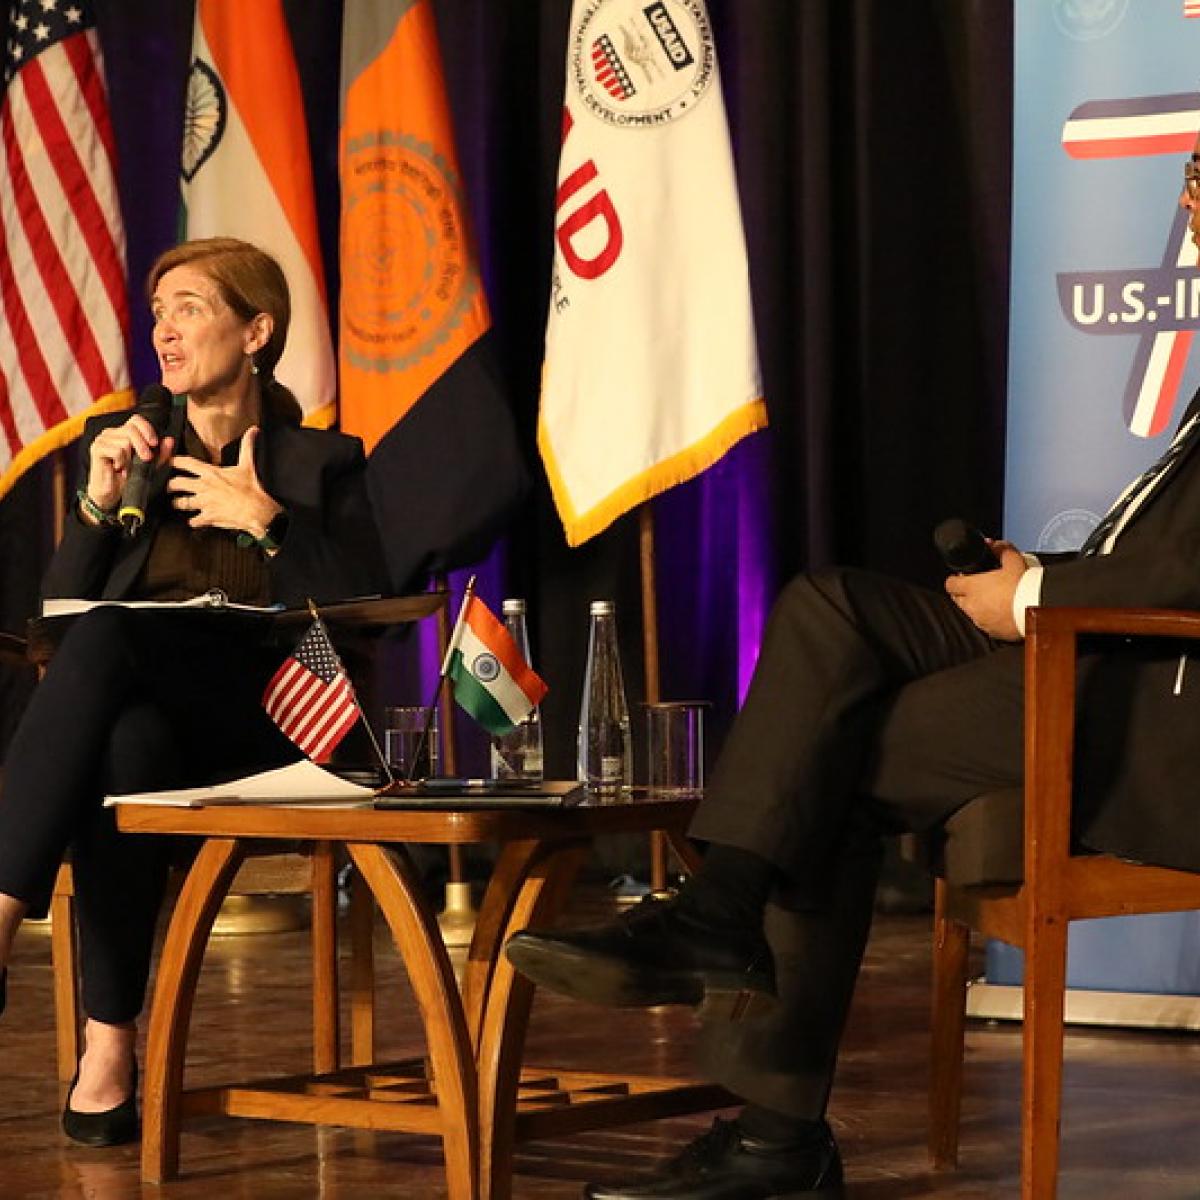 The History, Strength, and Future of the U.S. - India Development Partnership - An Interactive Talk